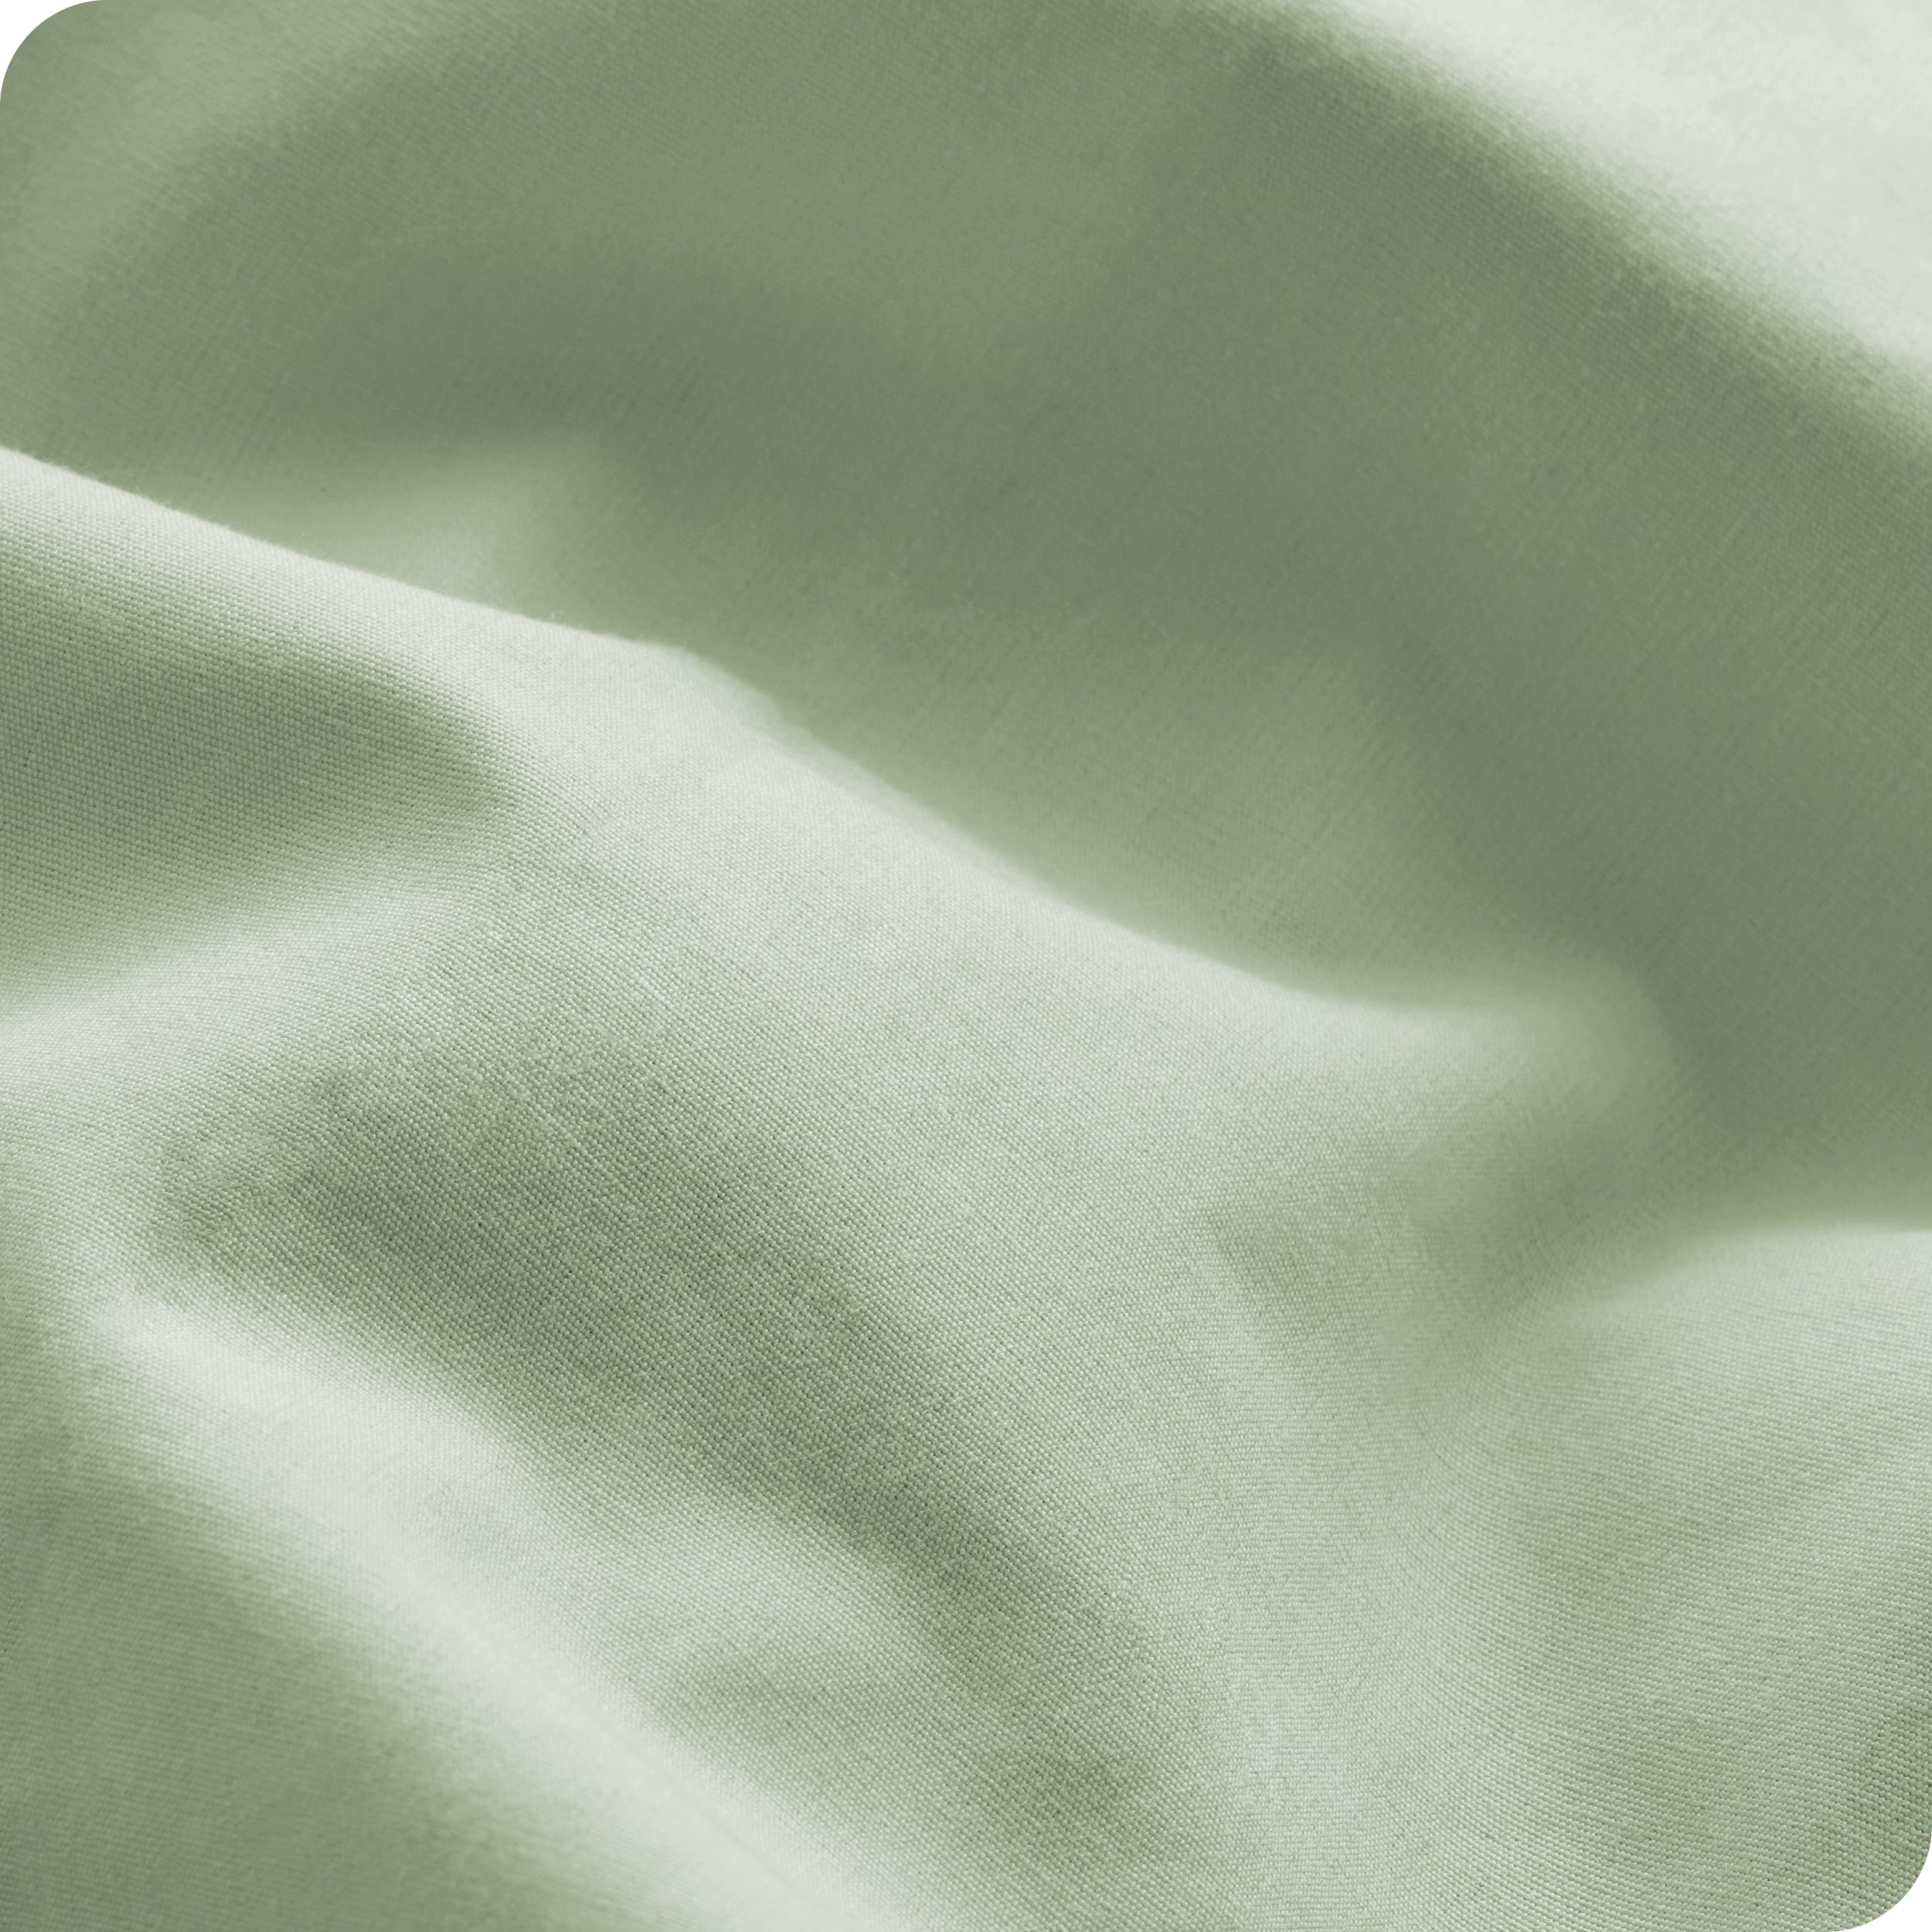 Close up showing the texture of a percale sheet